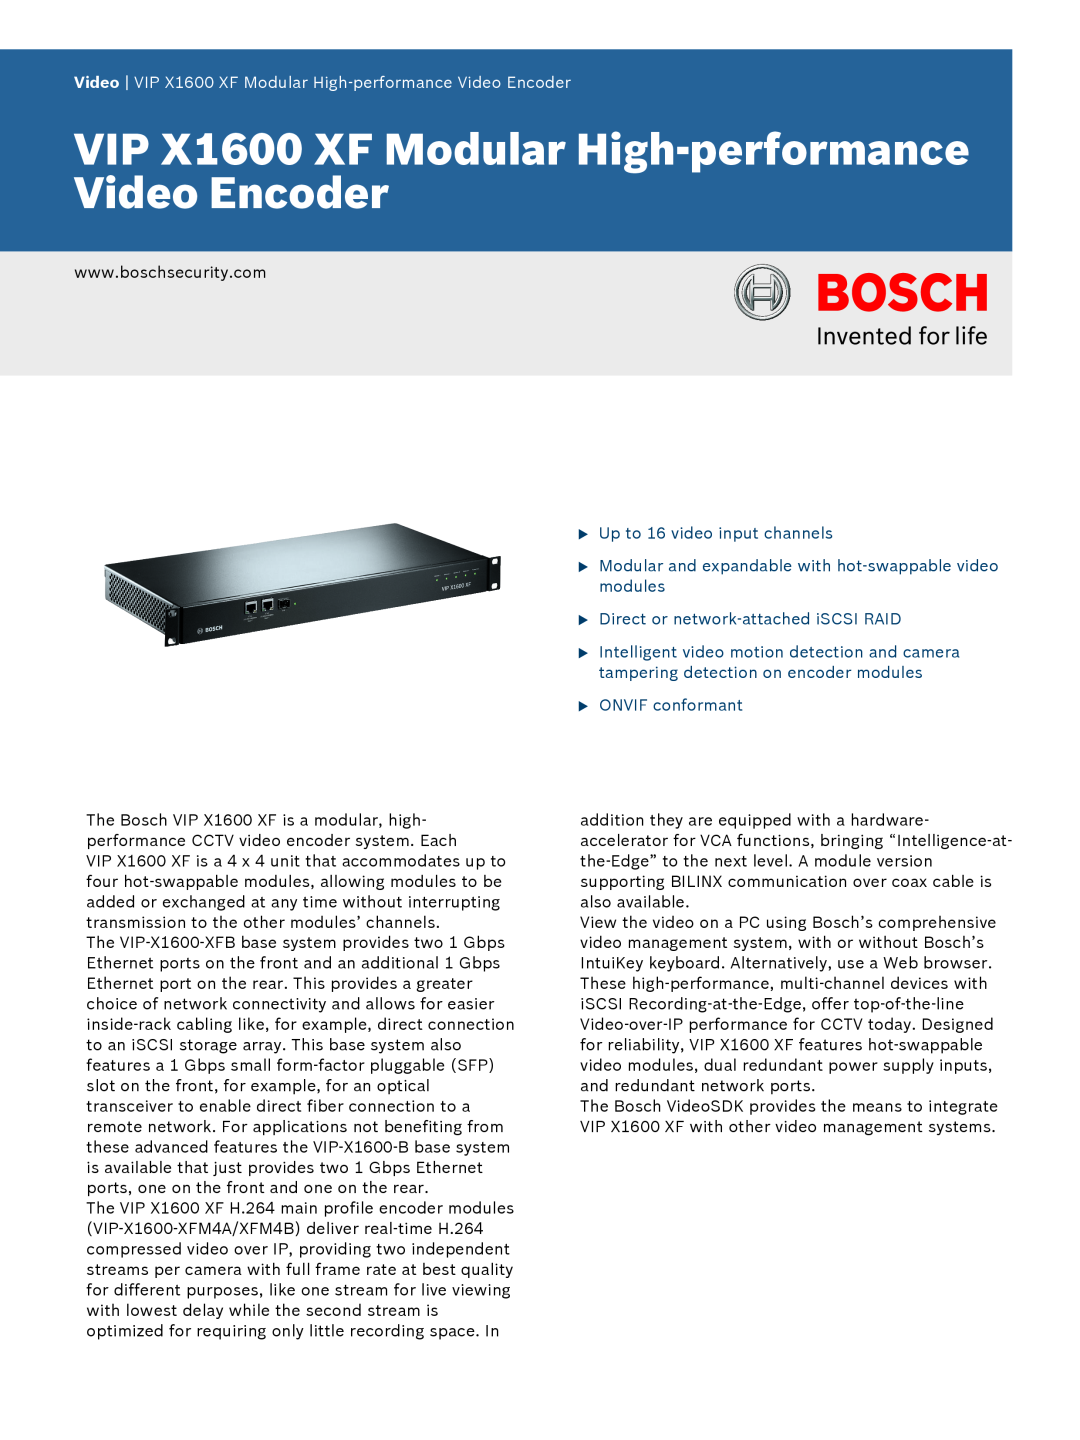 Bosch Appliances VIP, XF manual uUp to 16 video input channels, uDirect or network-attachediSCSI RAID, uONVIF conformant 